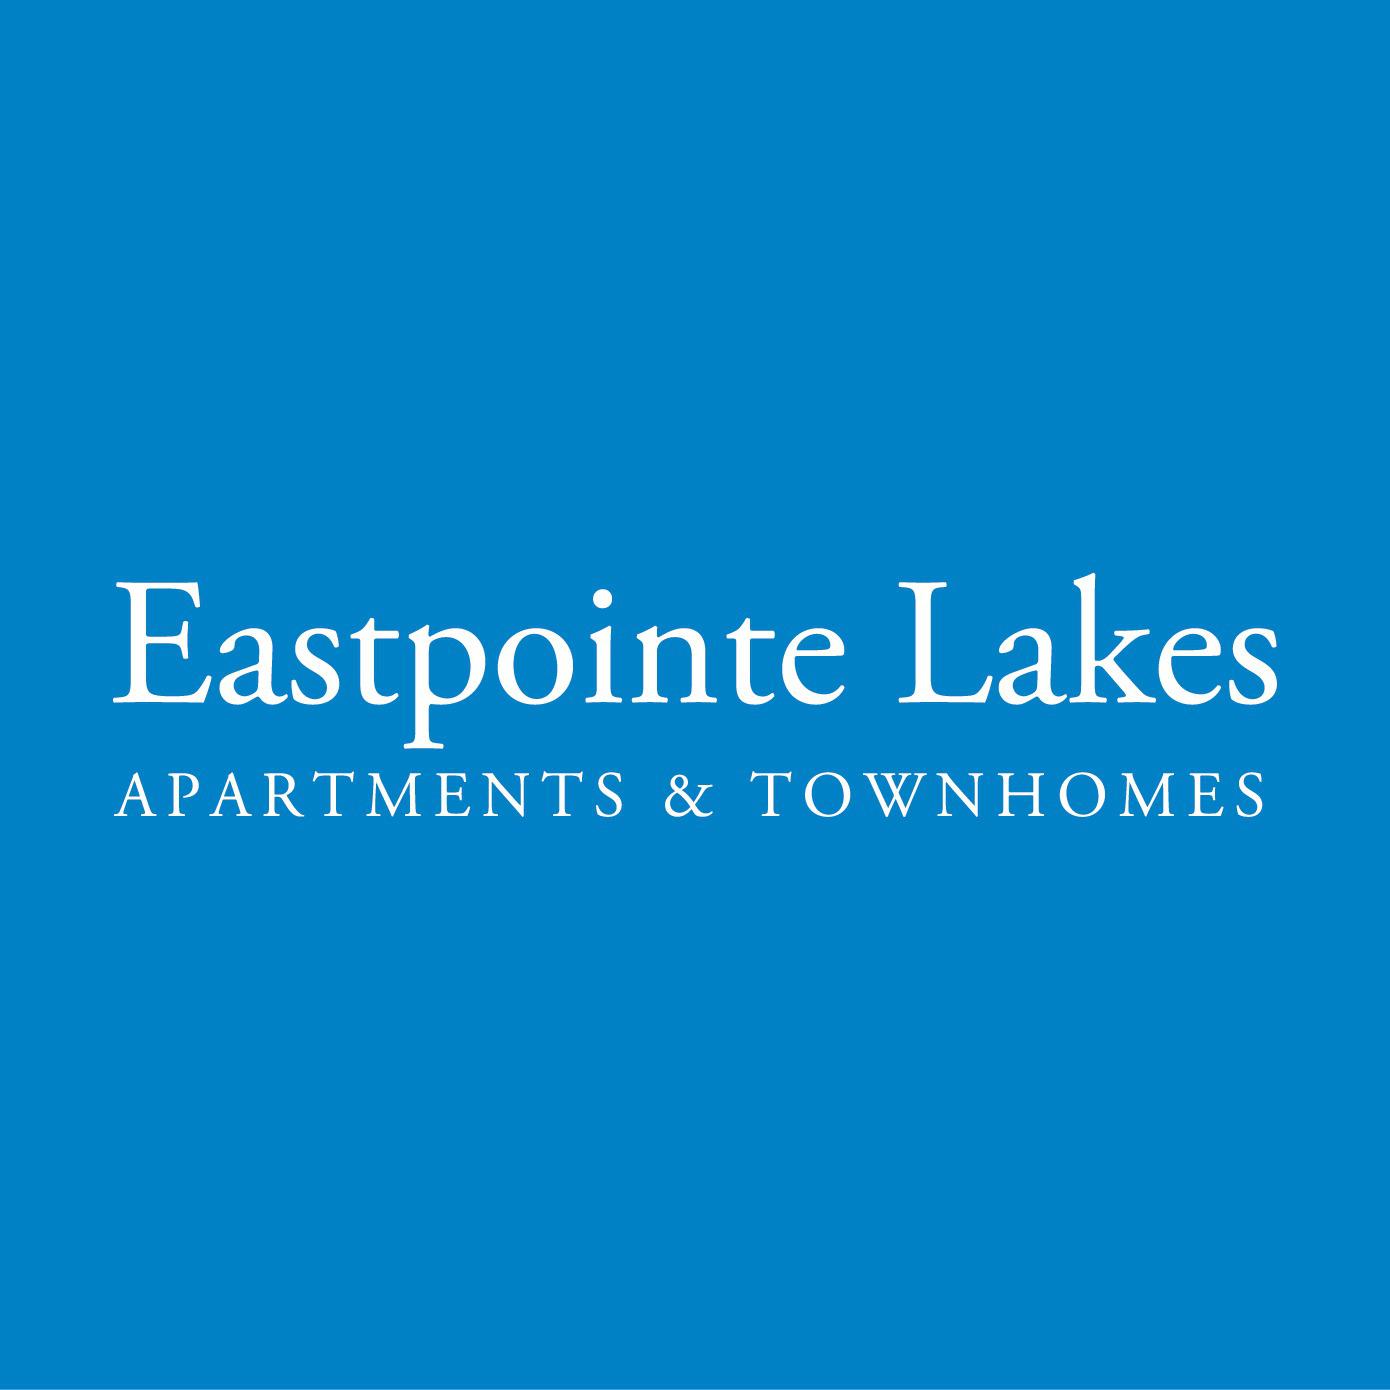 Eastpointe Lakes Apartments and Townhomes